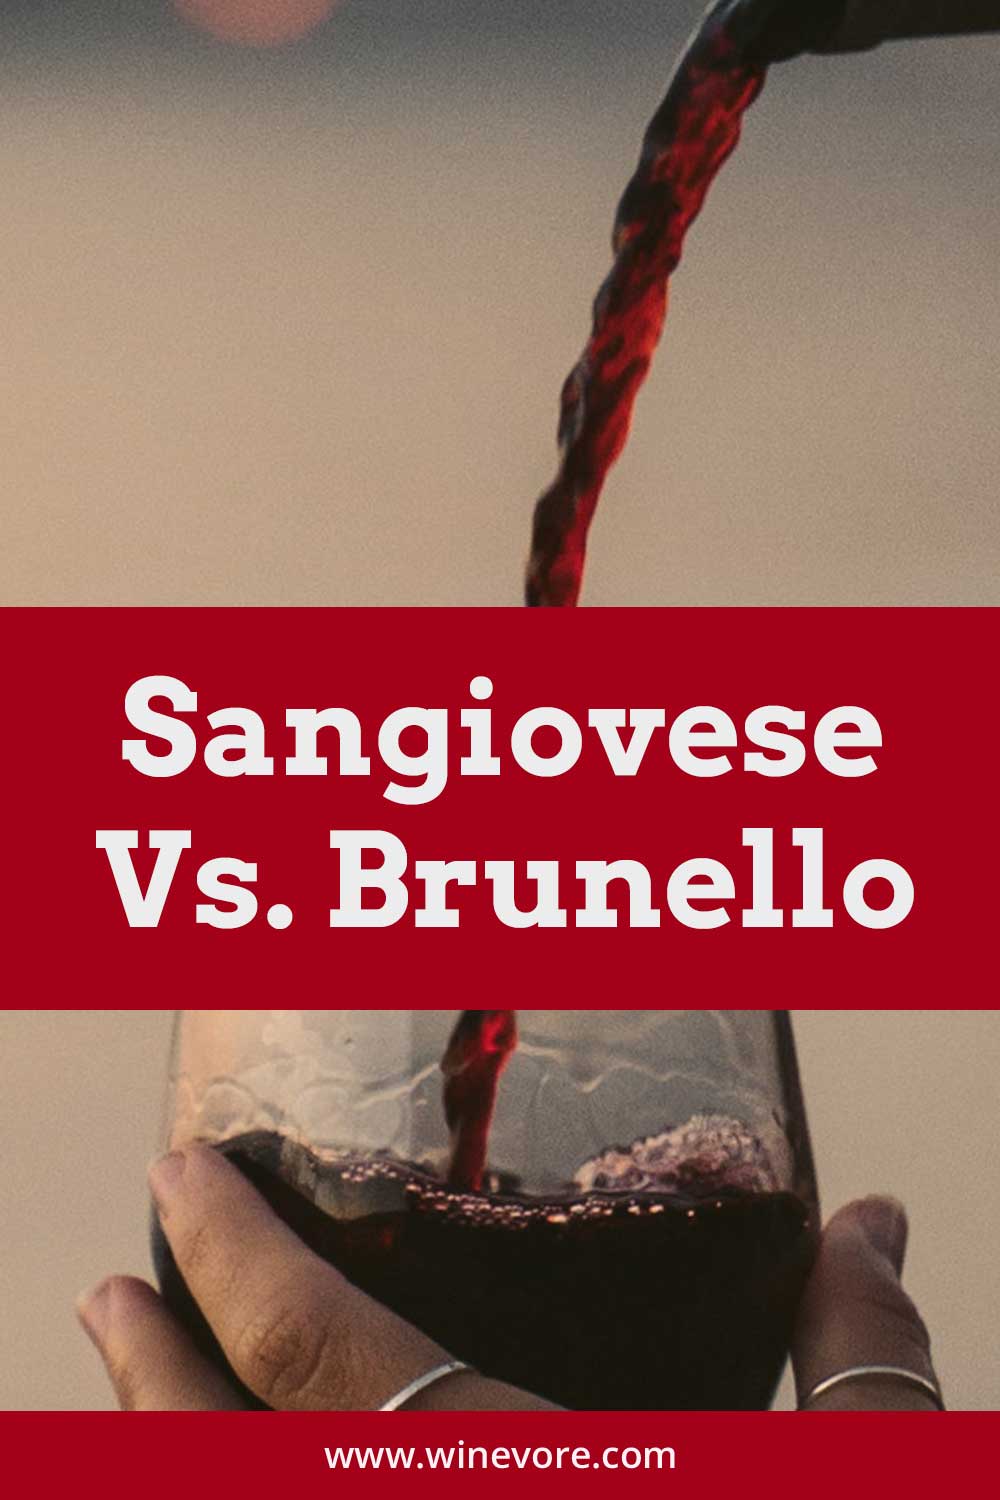 Pouring red wine while grabbing the glass with left hand - Sangiovese Vs. Brunello.